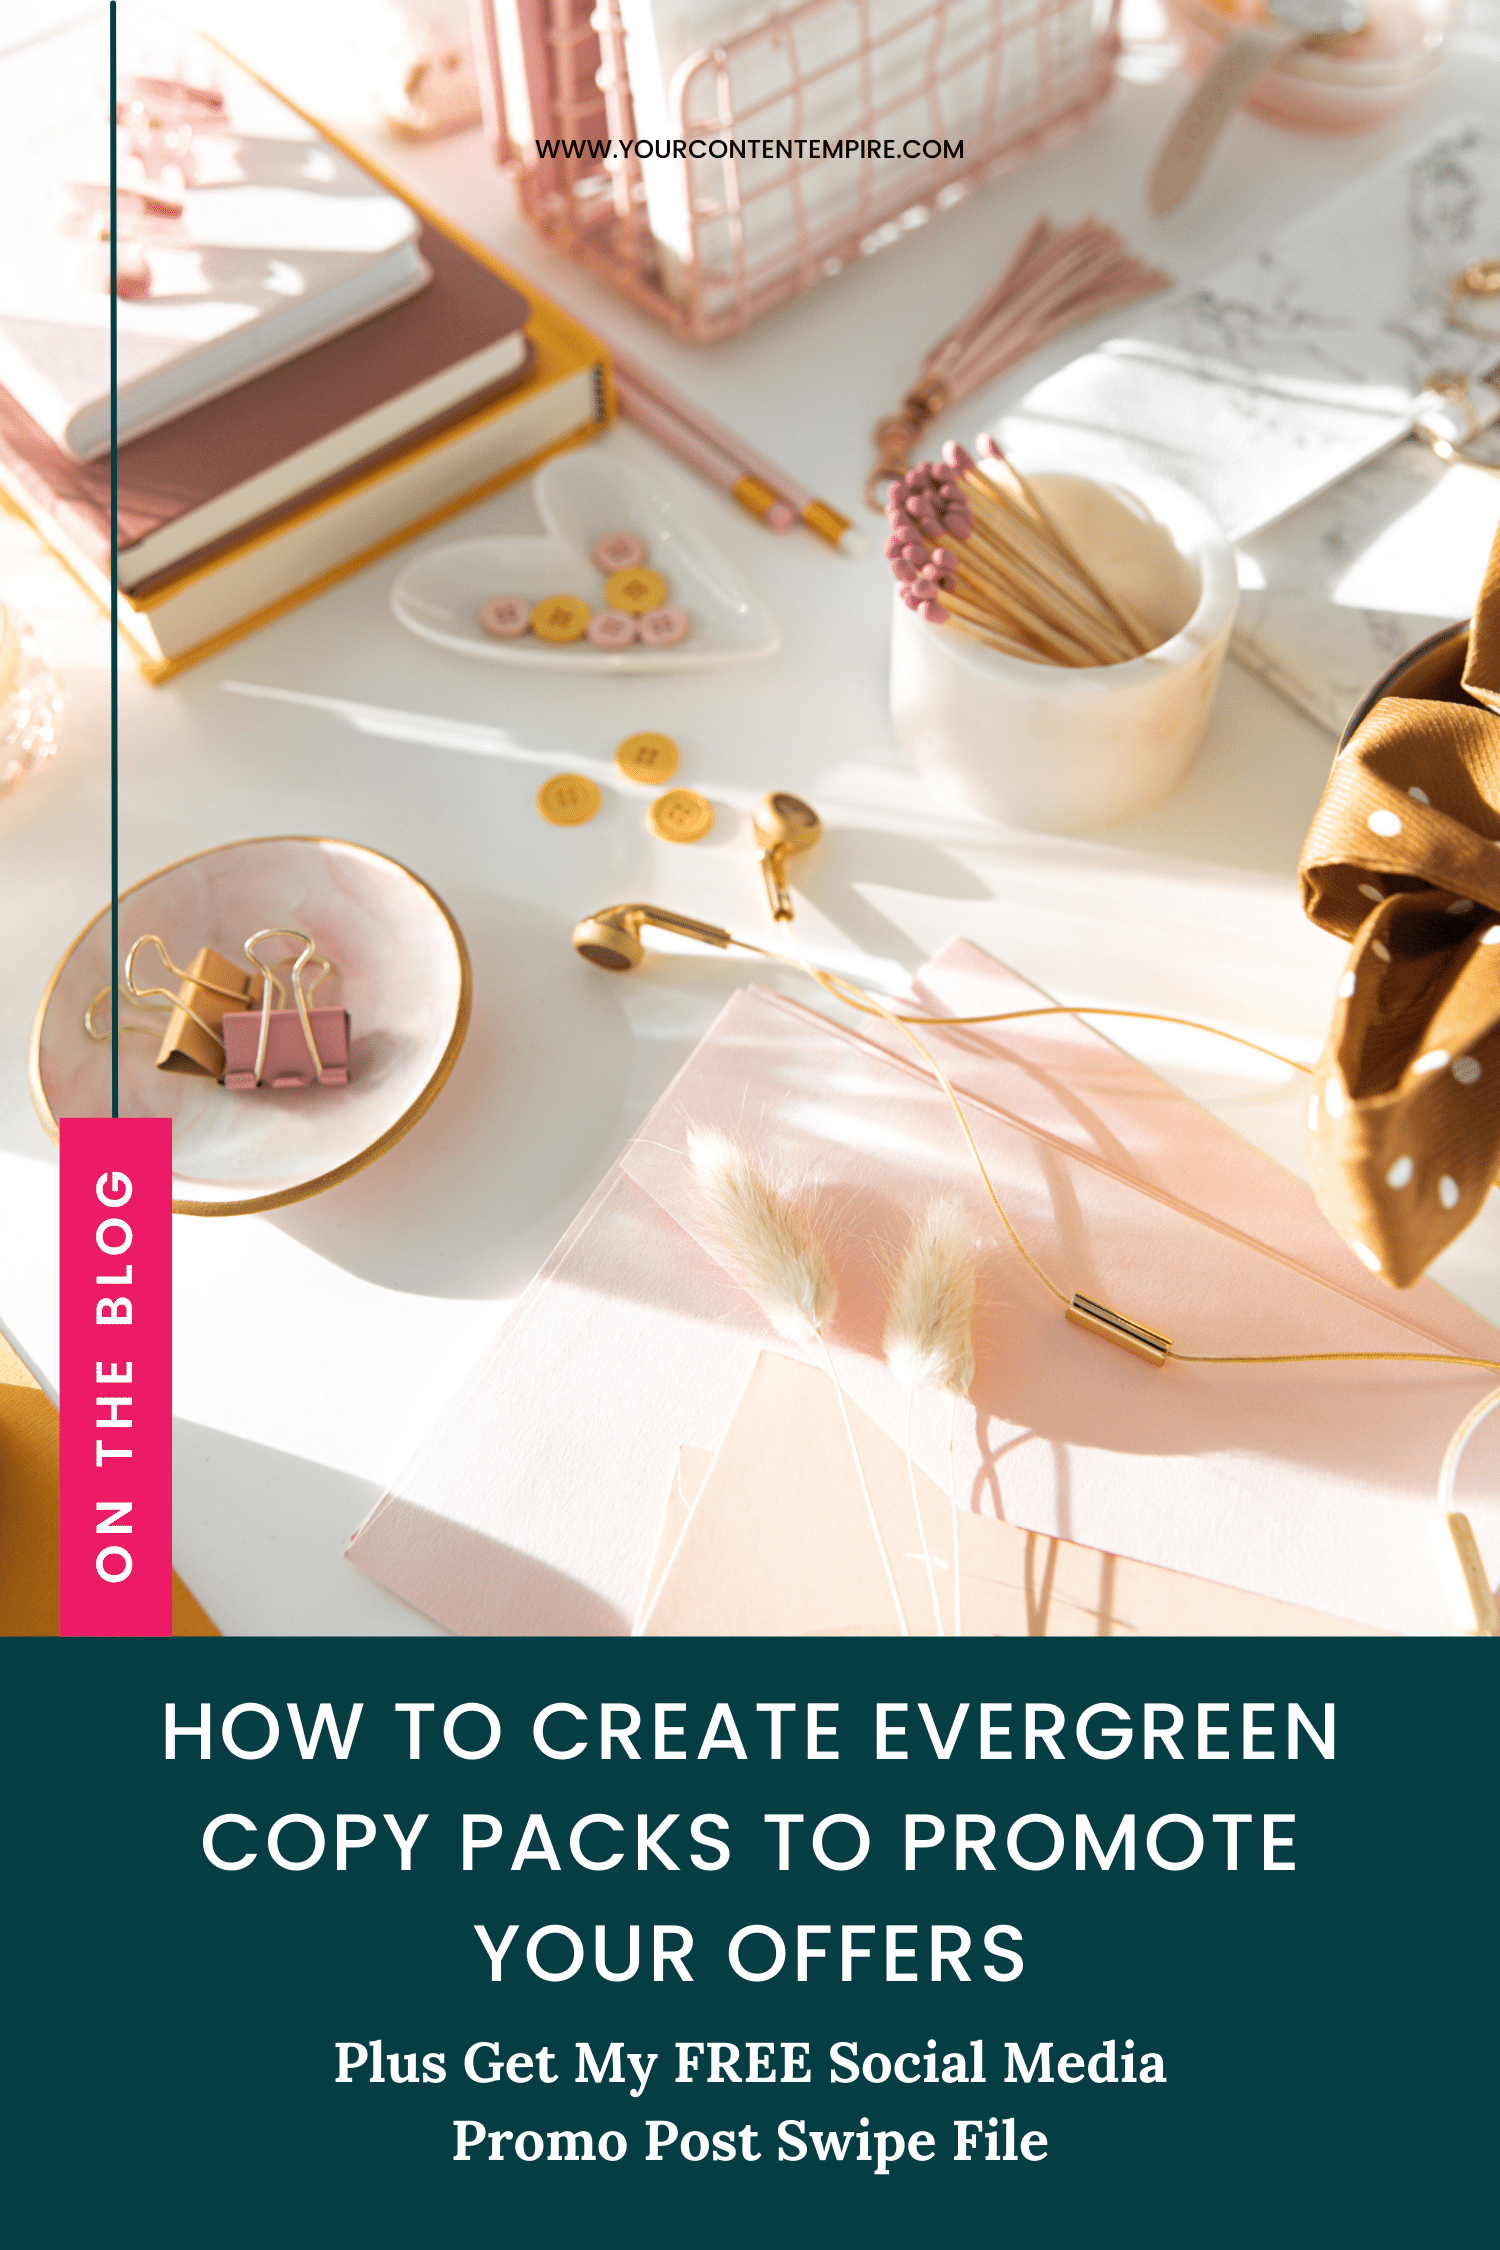 How to Create Evergreen Copy Packs to Promote Your Offers